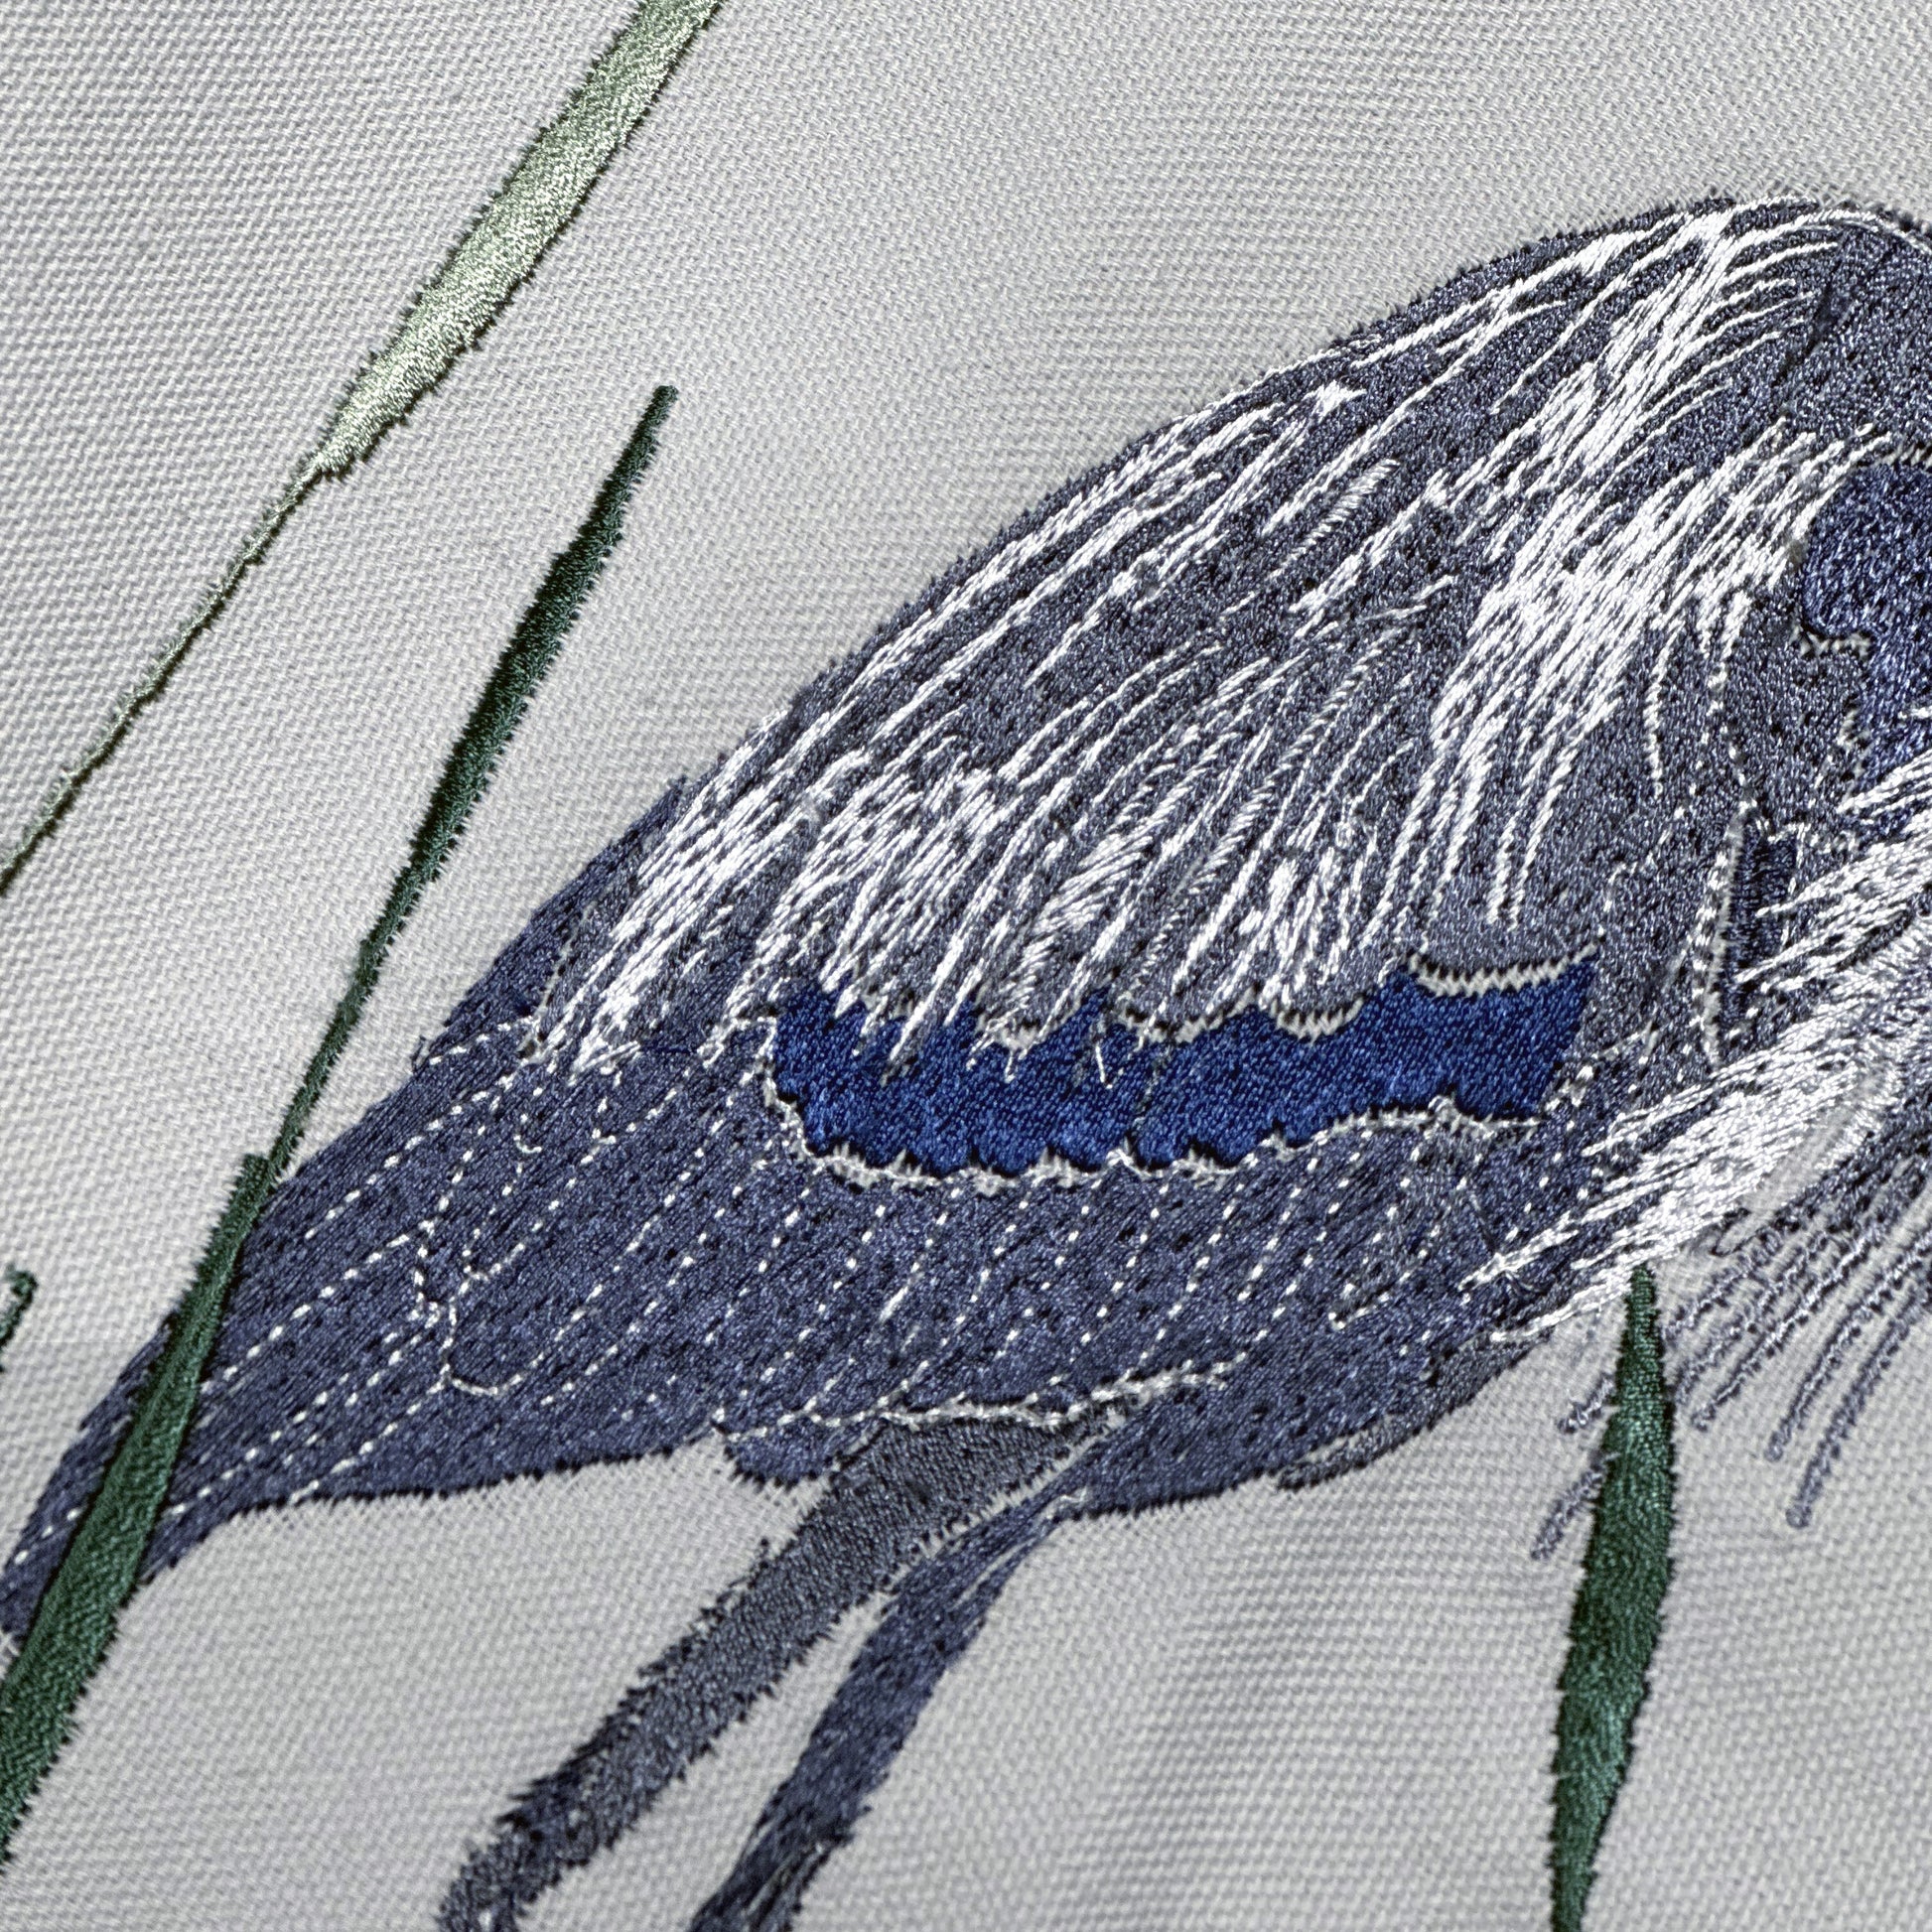 Detail shot of the Great Blue Heron Lumbar Pillow embroidery.